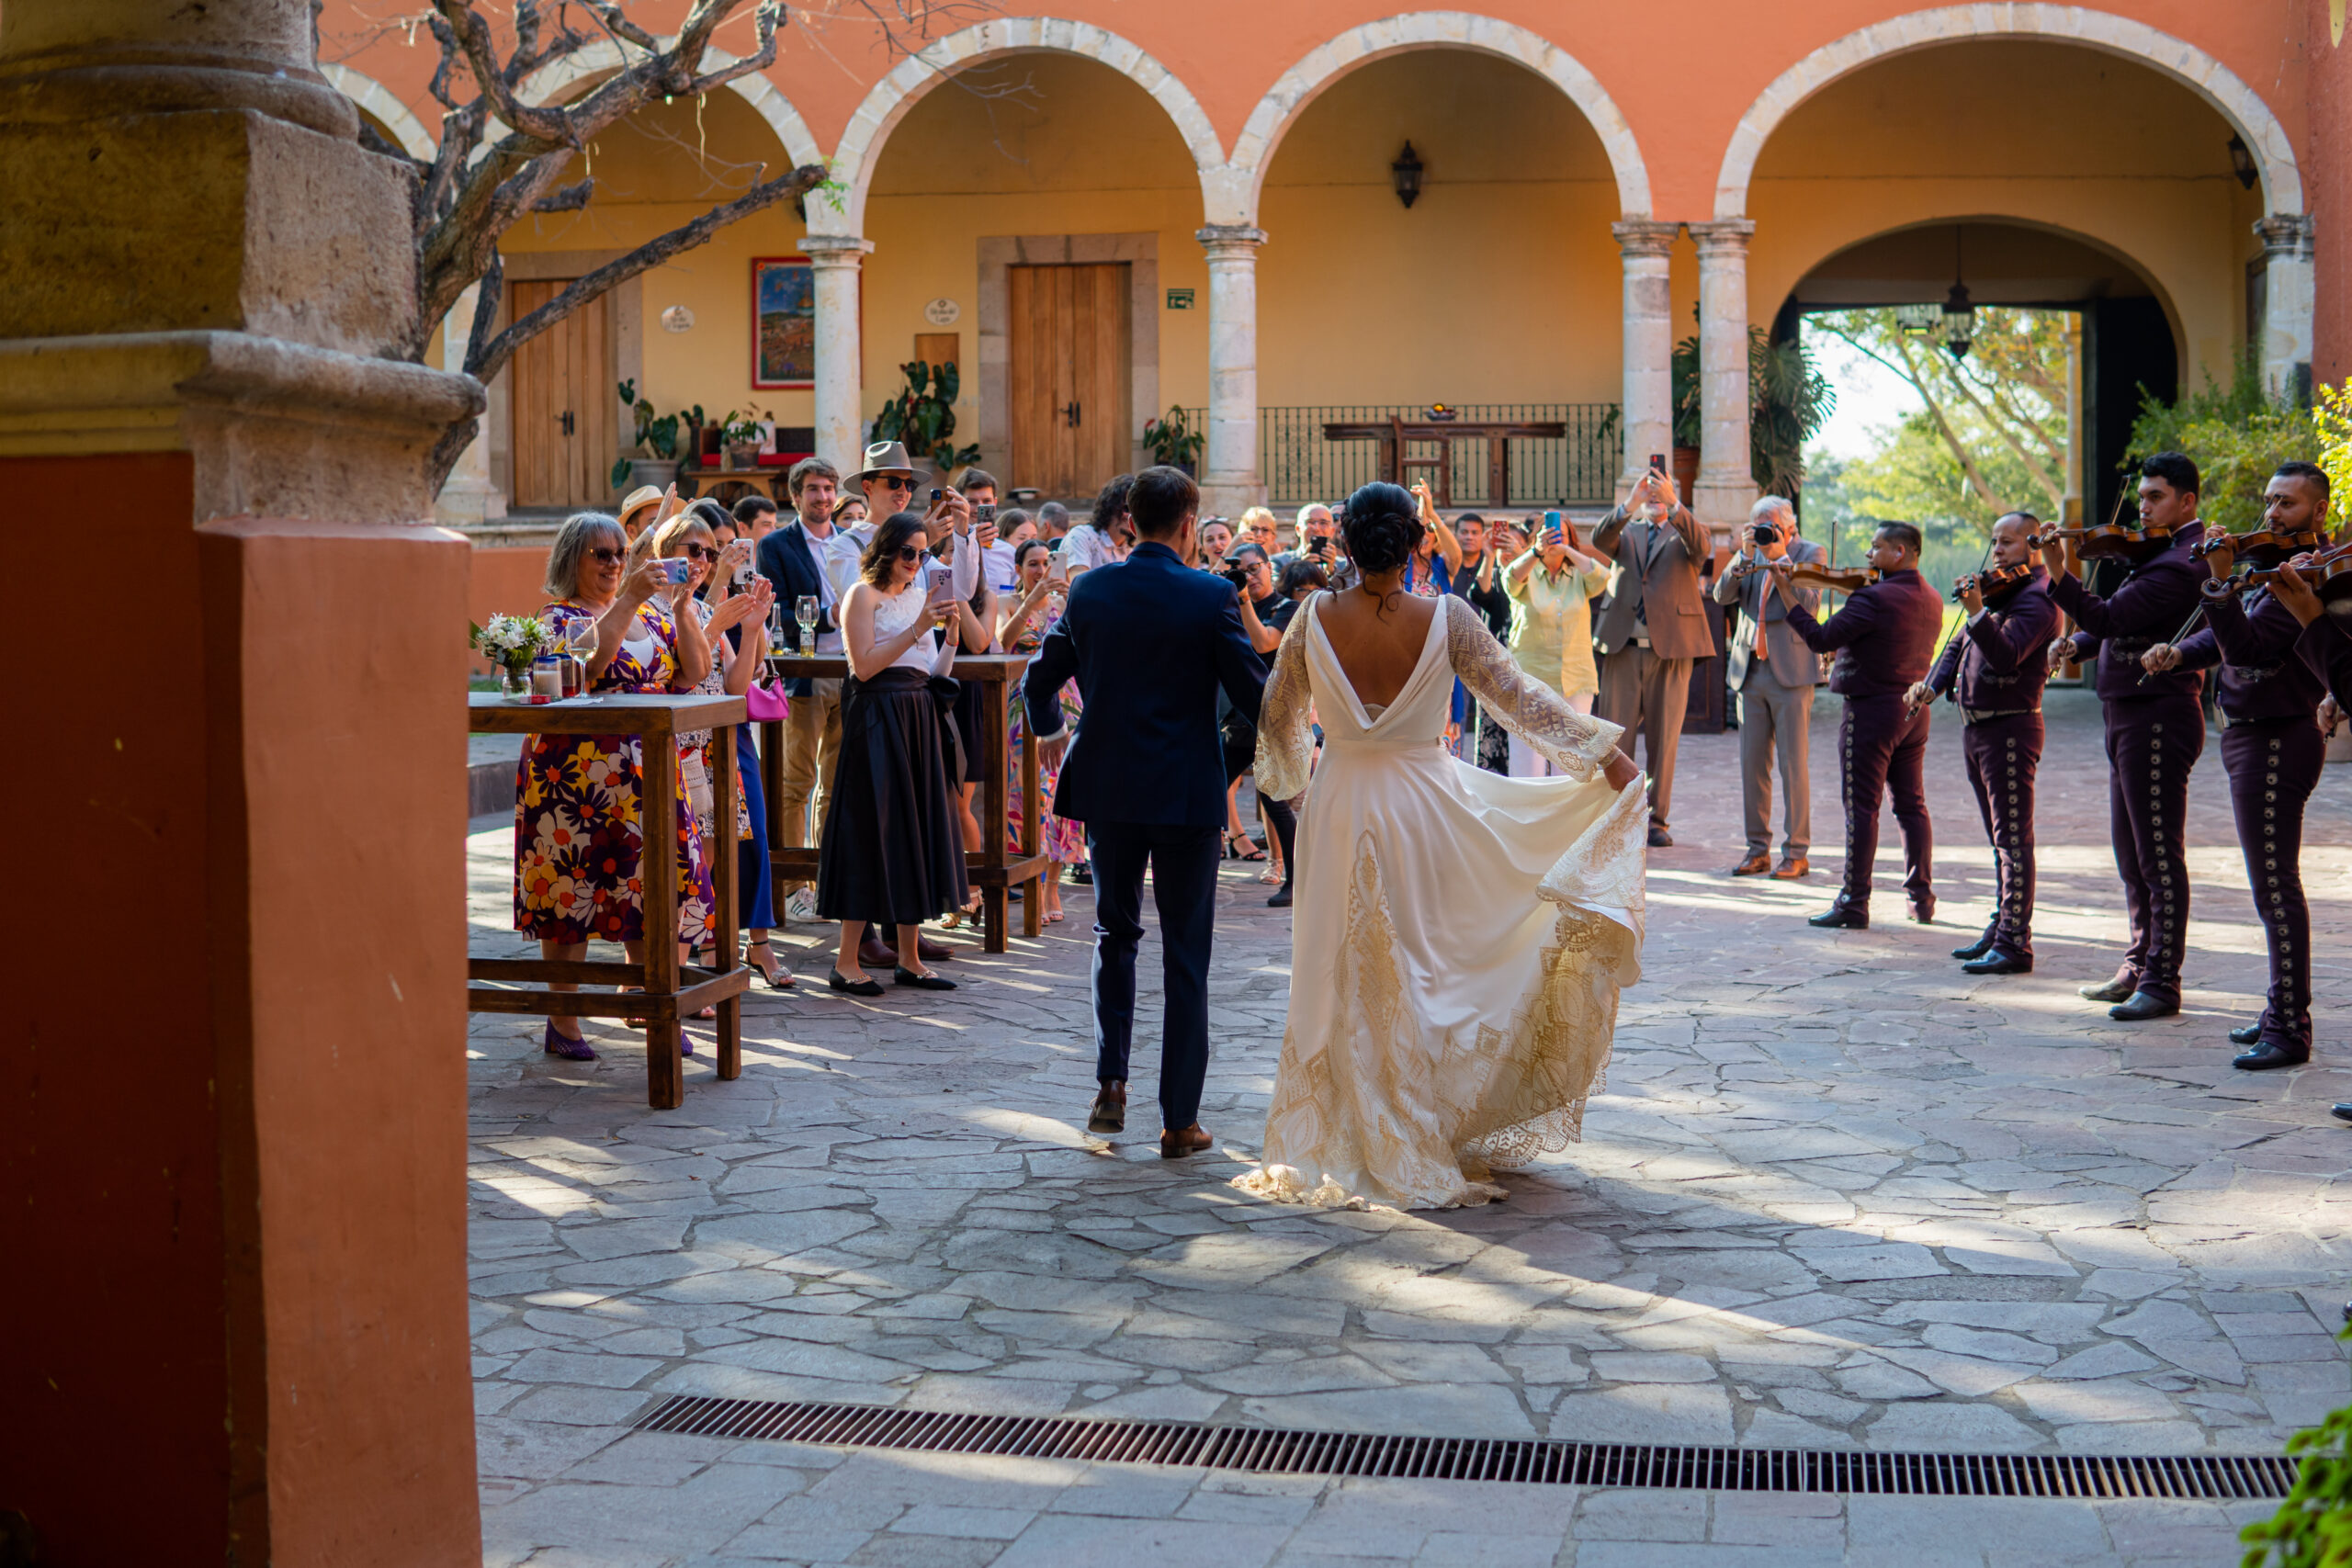 Have a destination wedding in Mexico for a week!